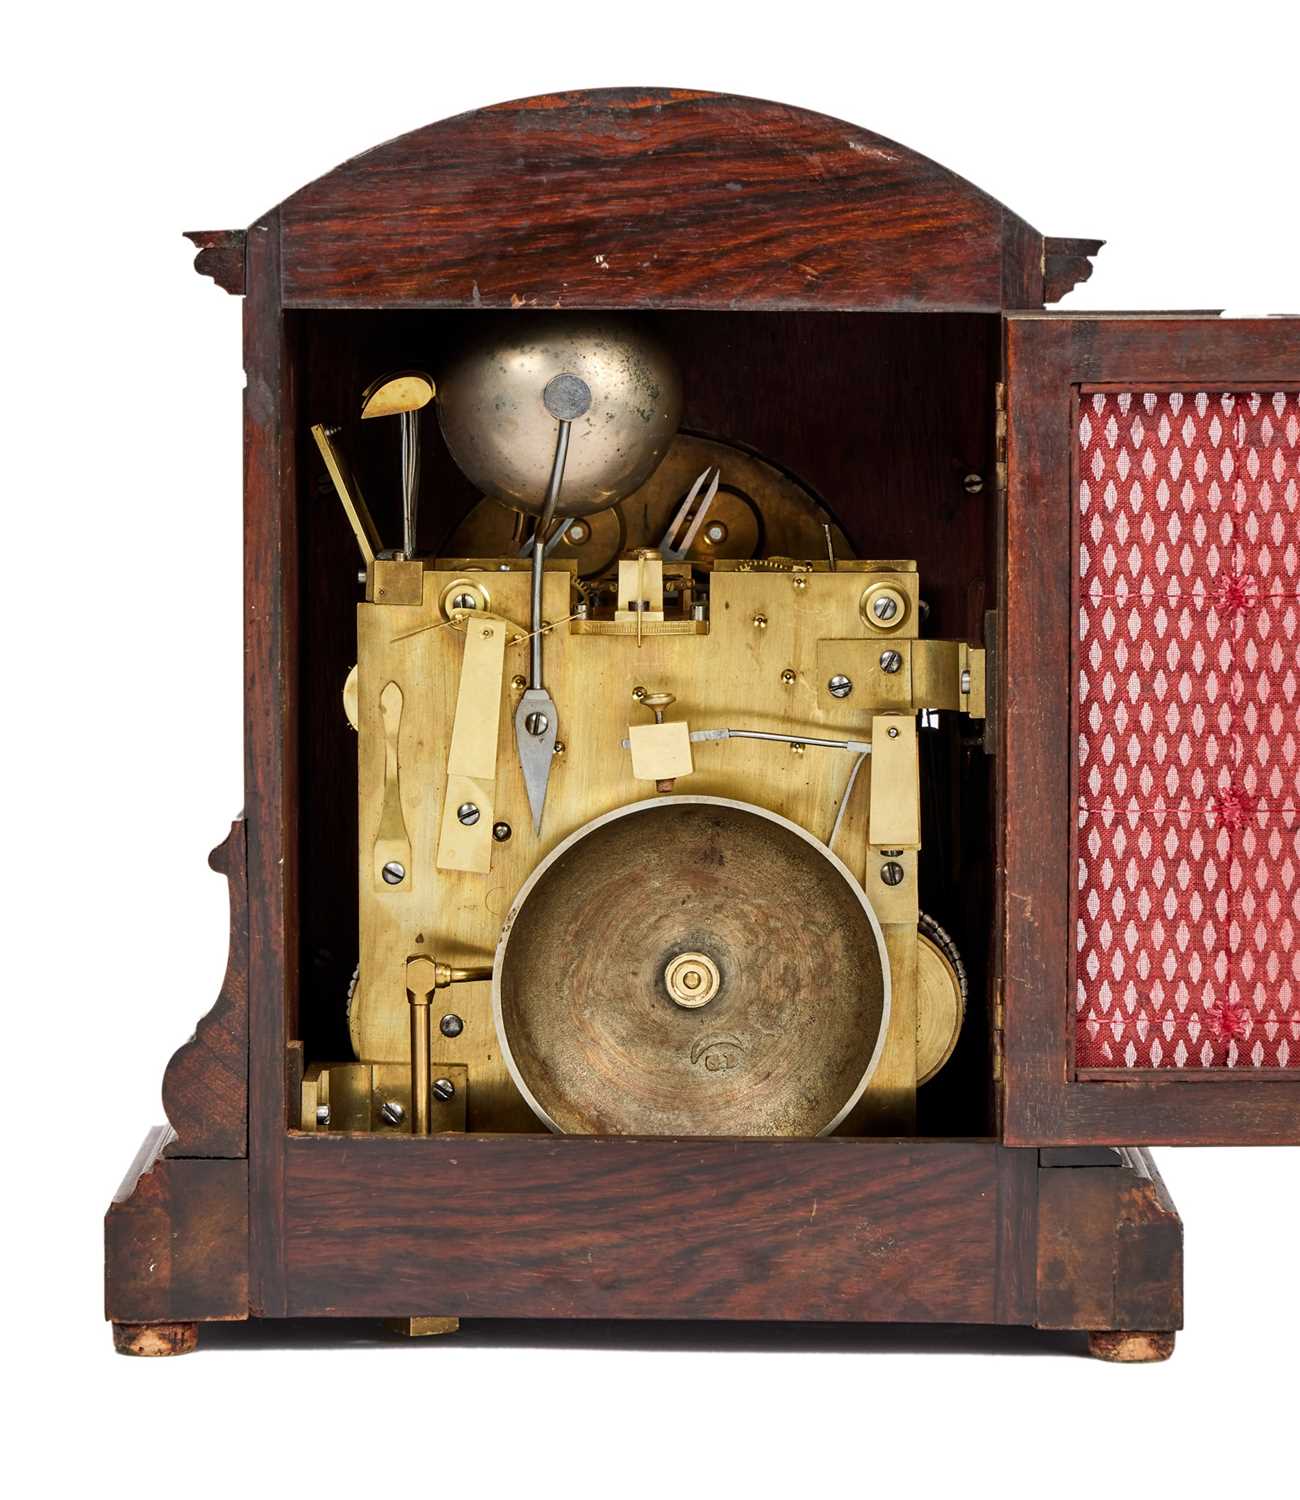 A RARE AND FINE 19TH CENTURY MINIATURE QUARTER CHIMING CLOCK WITH LEVER PLATFORM ESCAPEMENT - Image 2 of 6